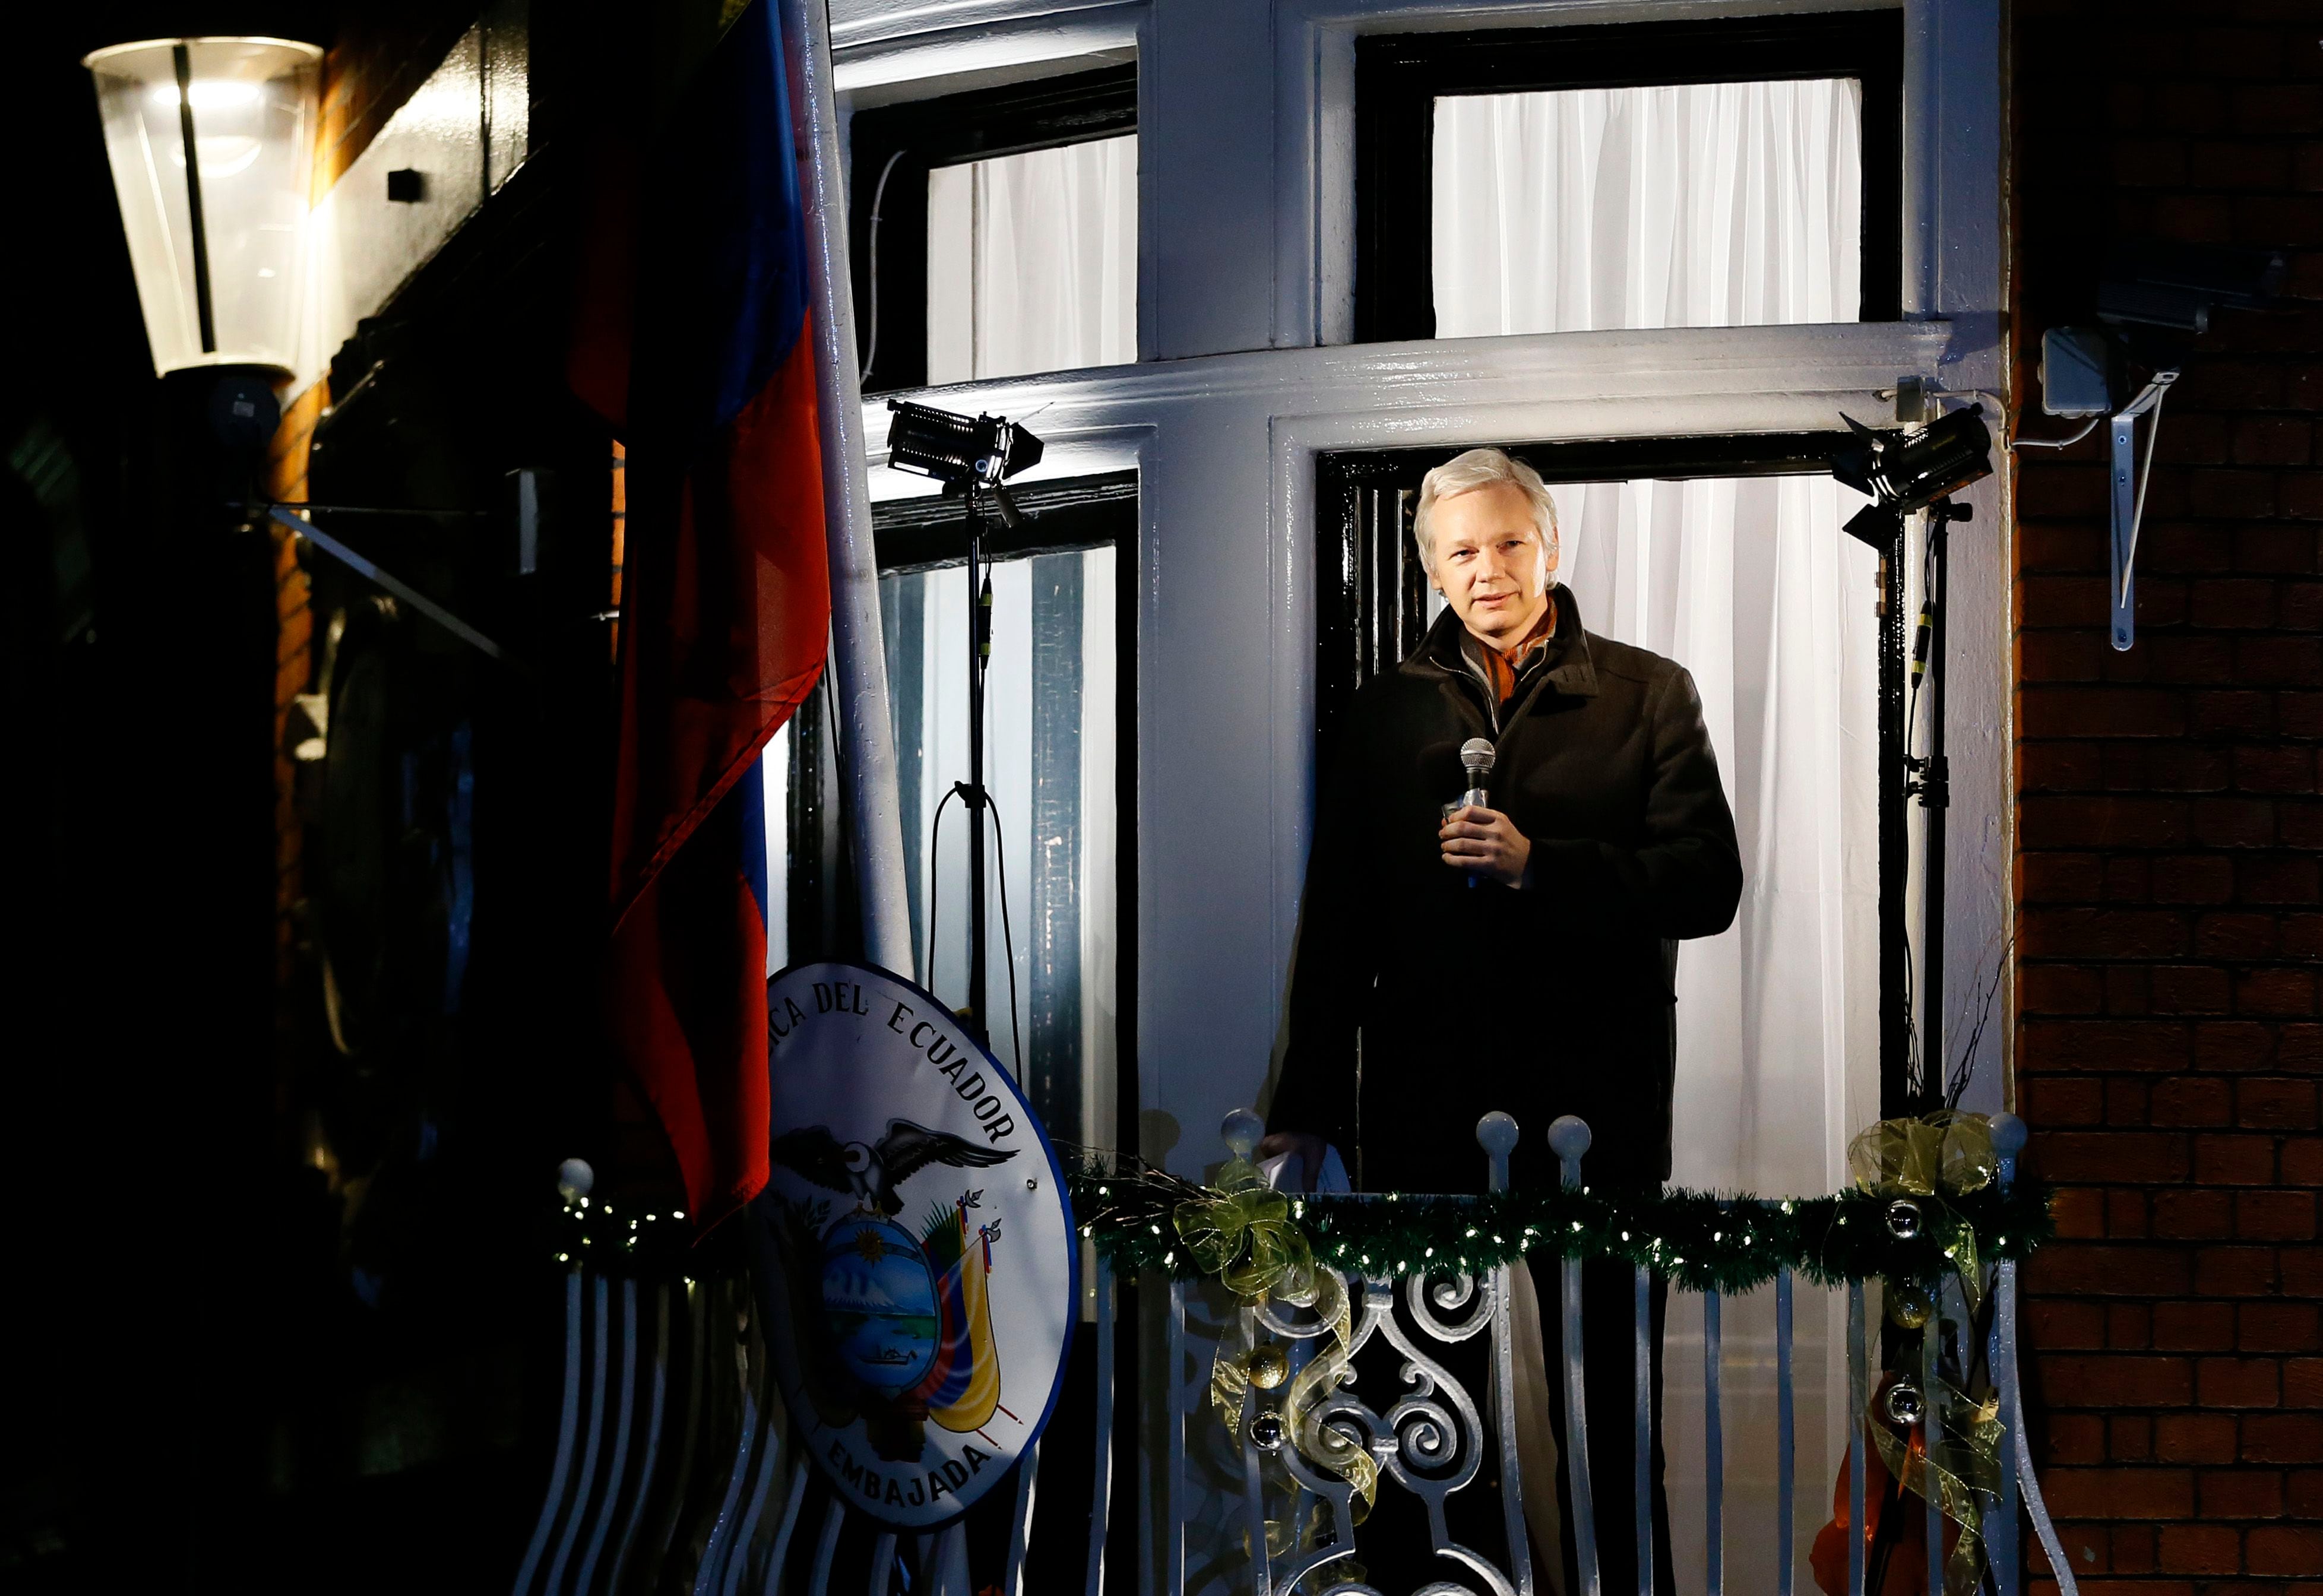 FILE - In this Thursday, Dec. 20, 2012 file photo, Julian Assange, founder of WikiLeaks speaks to the media and members of the public from a balcony at the Ecuadorian Embassy in London. A Swedish appeals court on Thursday, Nov. 20, 2014 upheld the detention order on Julian Assange, dismissing a challenge by the WikiLeaks founder who is wanted by Swedish prosecutors in an investigation of alleged sex crimes. (AP Photo/Kirsty Wigglesworth, File)